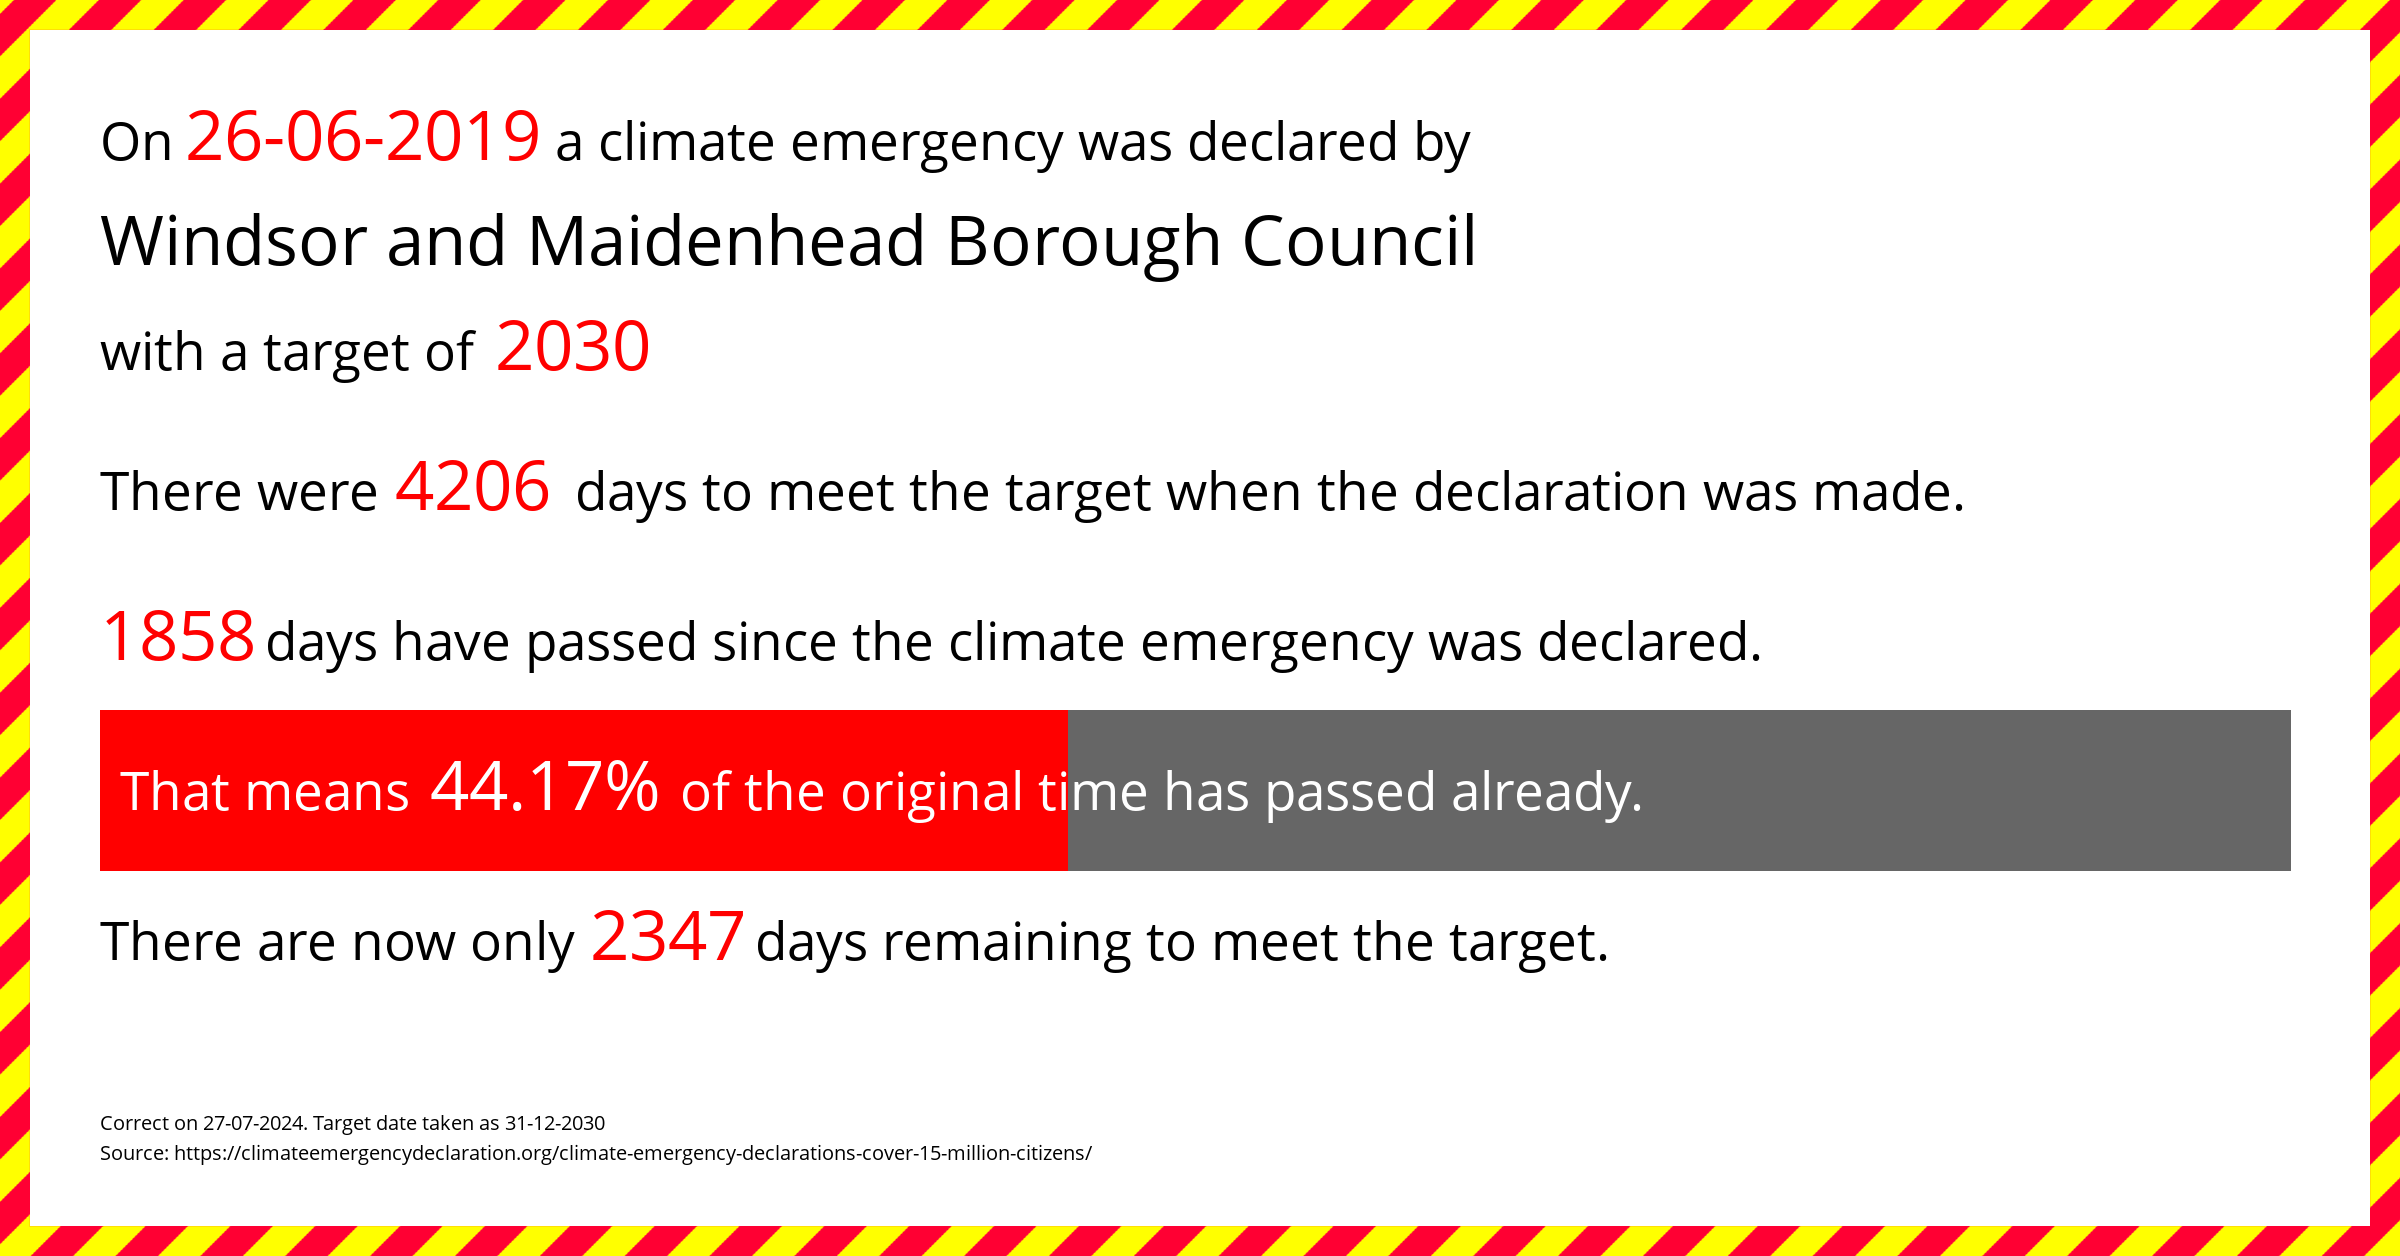 Windsor and Maidenhead Borough Council declared a Climate emergency on Wednesday 26th June 2019, with a target of 2030.